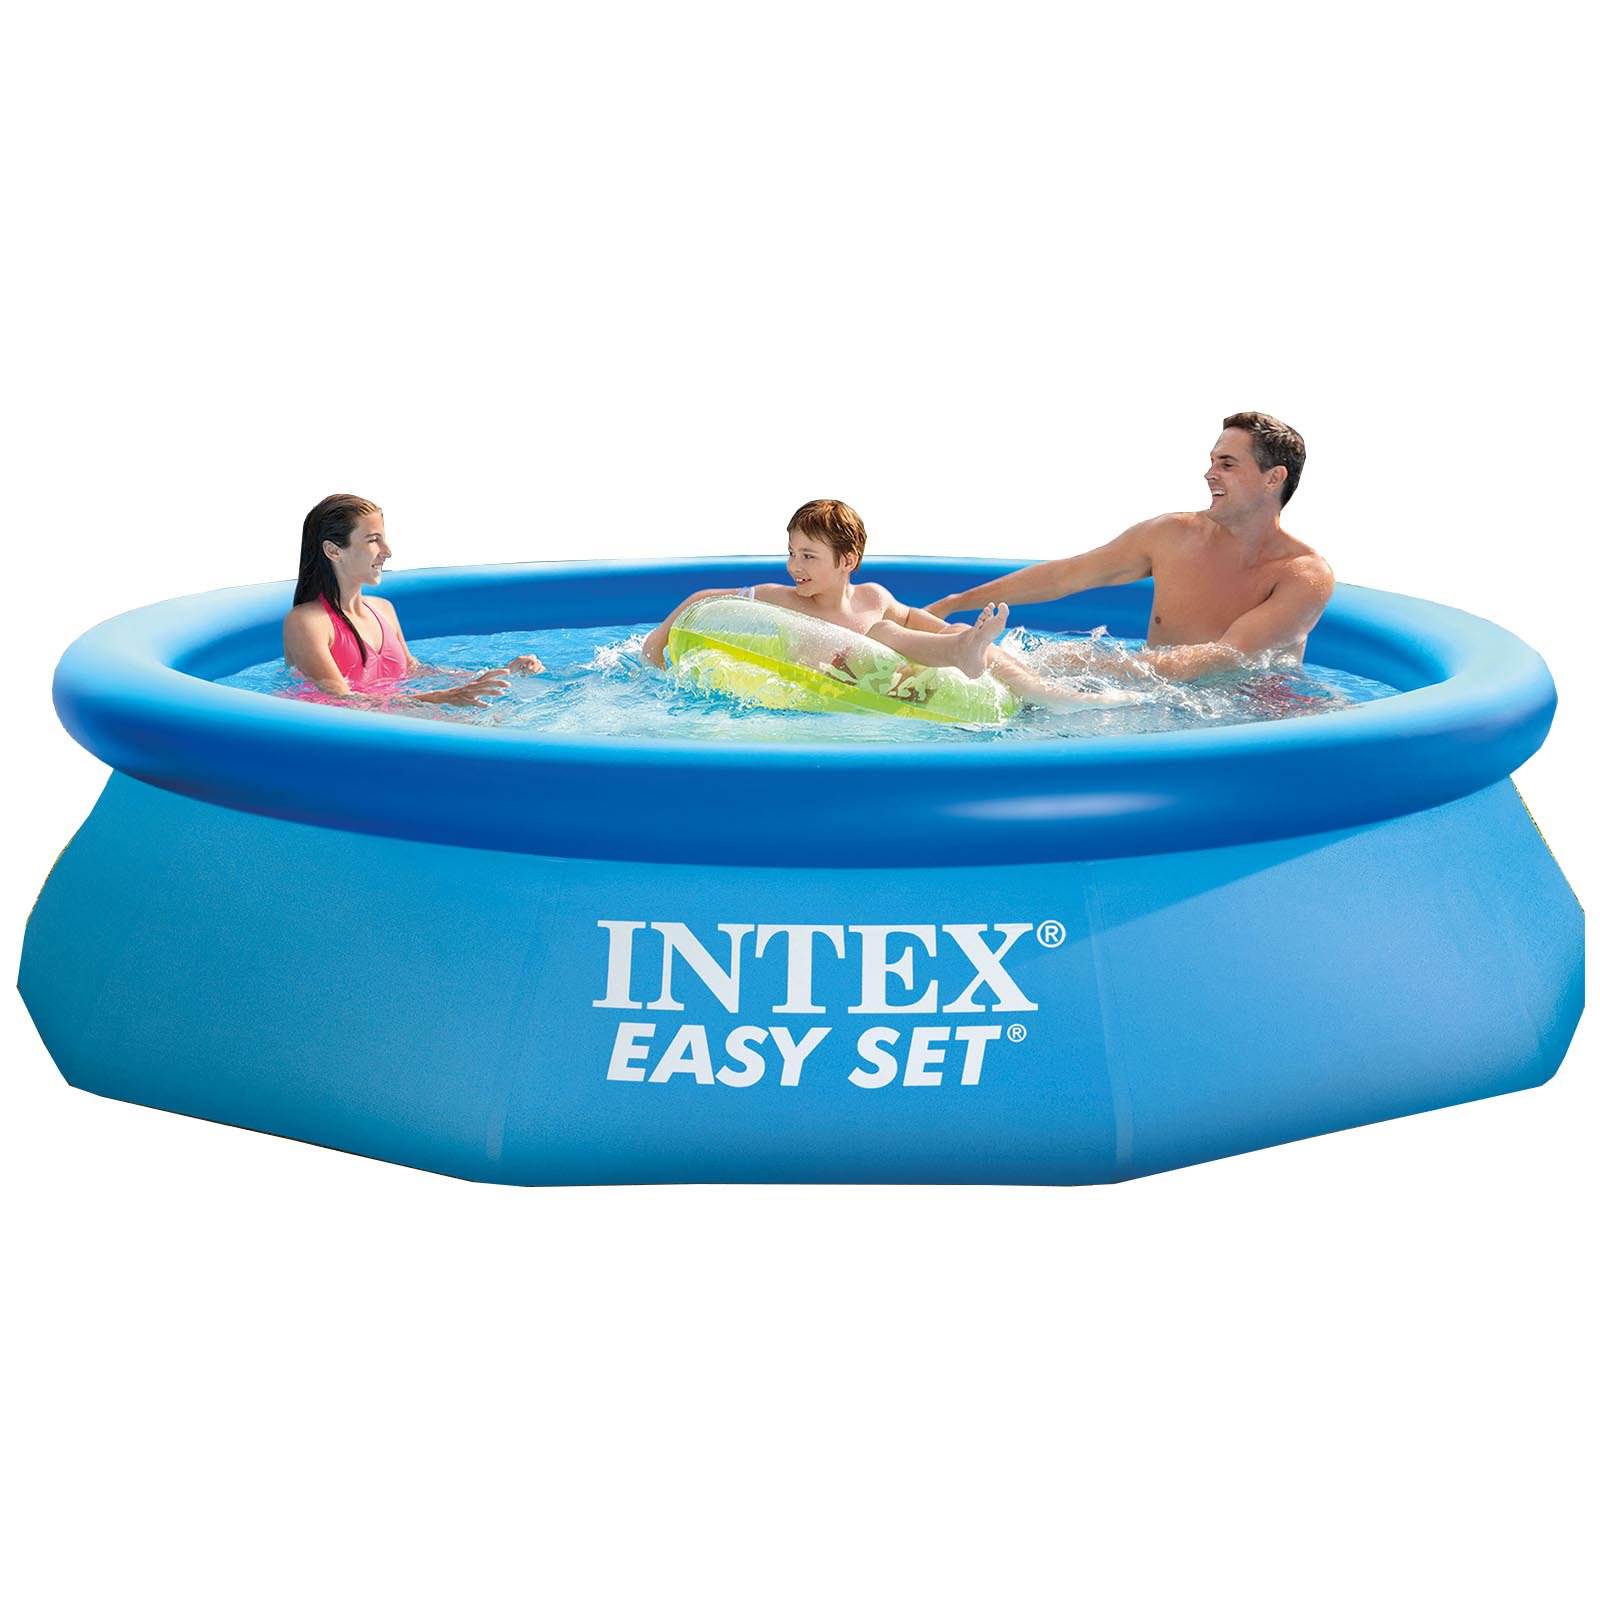 Intex Easy Set 10 Ft x 30 In Above Ground Inflatable Round Swimming Pool - image 4 of 9